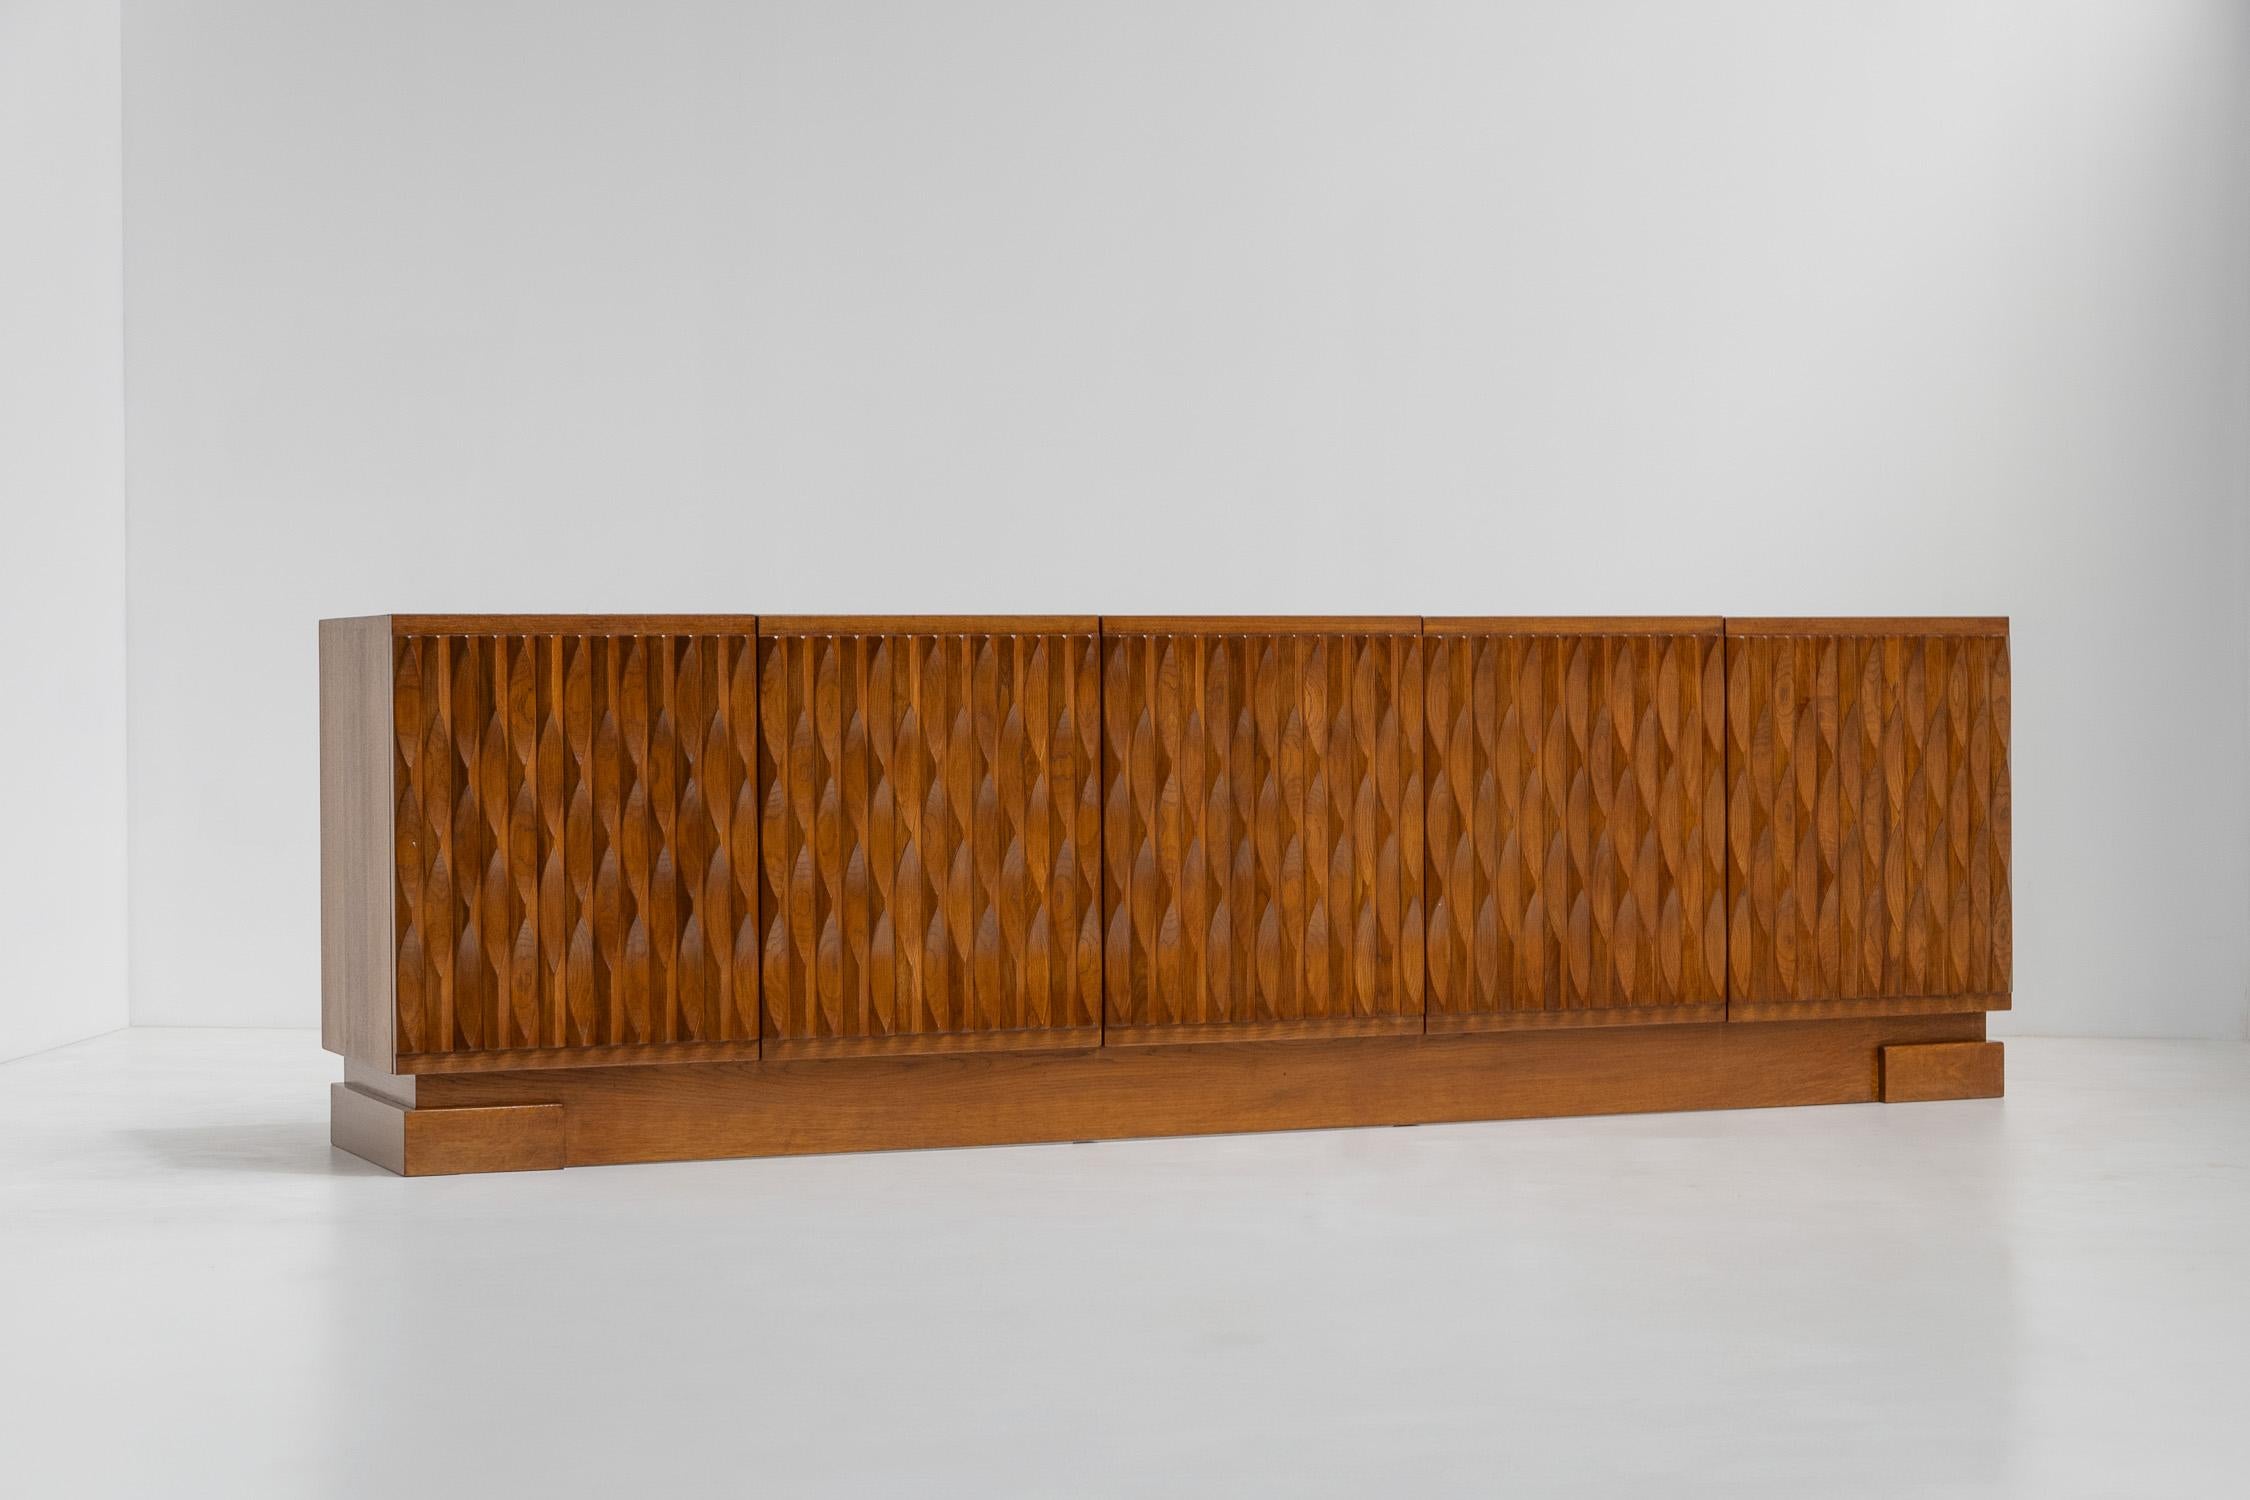 Impressive graphic, brutalist-style design credenza, Belgium

Because of its dimensions and the beautiful sculptured doors, it beats all the other sideboards out there. The woodwork is out of this world, and the blonde oak gives a delightful warmth